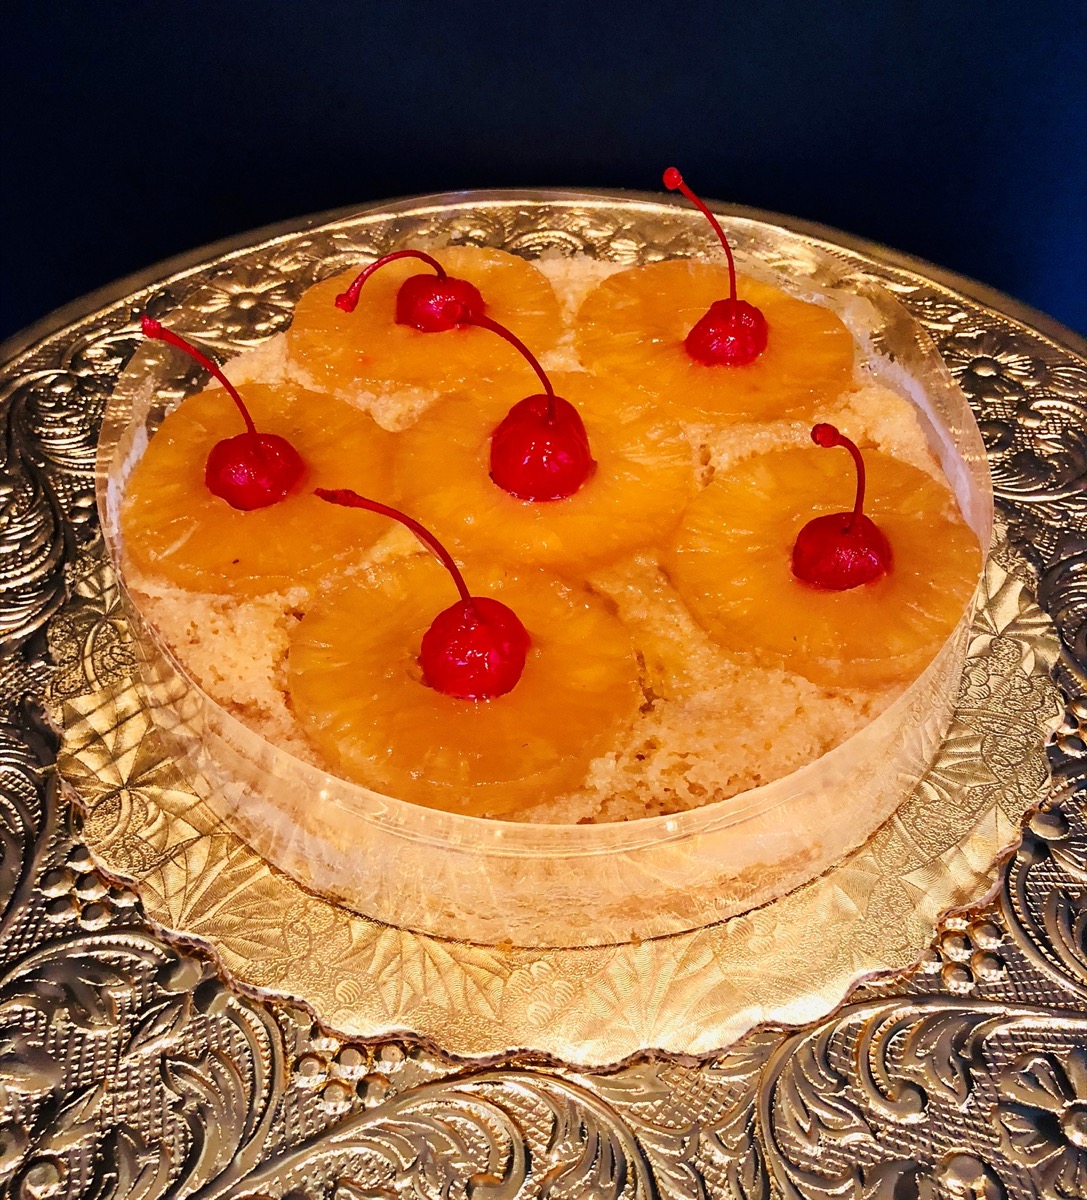 Christine's Cakes & Pastries - Pineapple upside down cakes